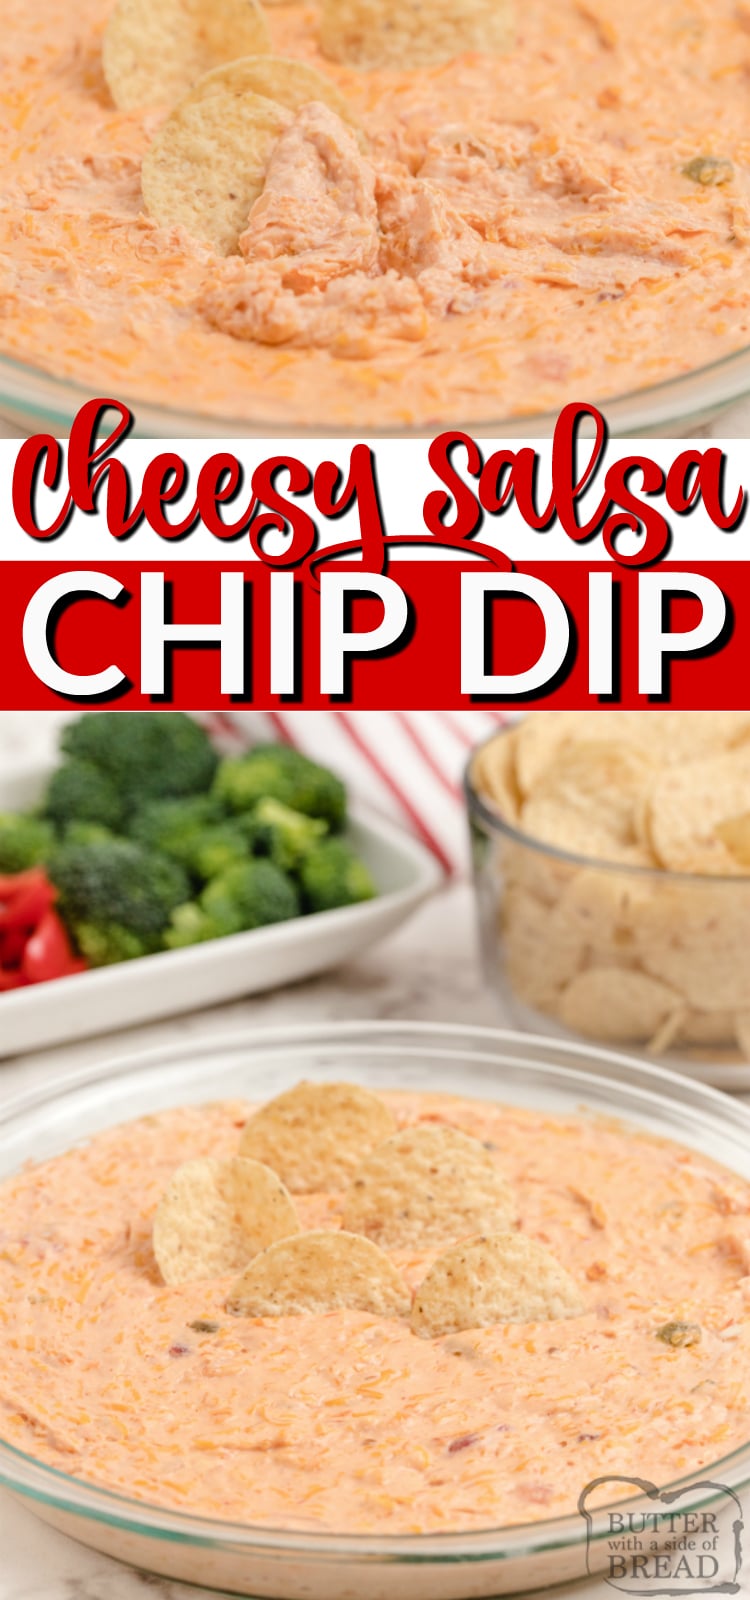 Cheesy Salsa Dip made with cream cheese, salsa, sour cream and cheddar cheese. This cream cheese salsa dip is baked and served warm with chips for an easy appetizer everyone loves!